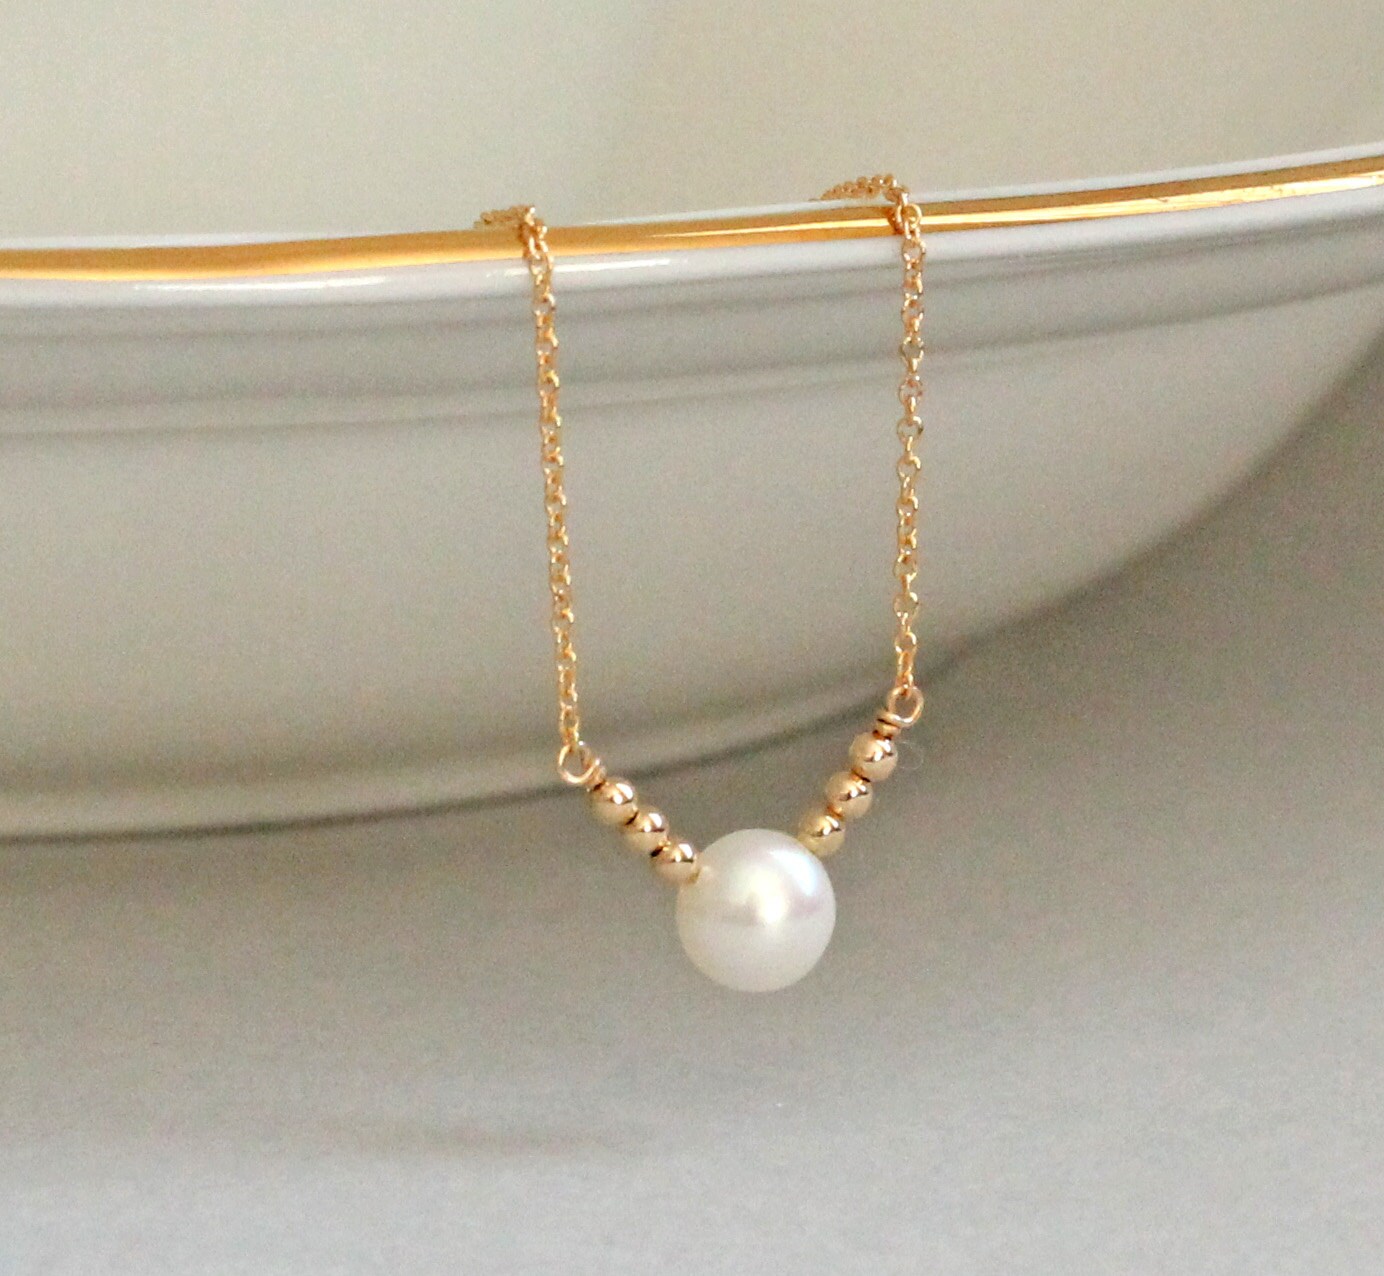 Single Pearl Necklace Dainty Gold Necklace 14K Gold Fill